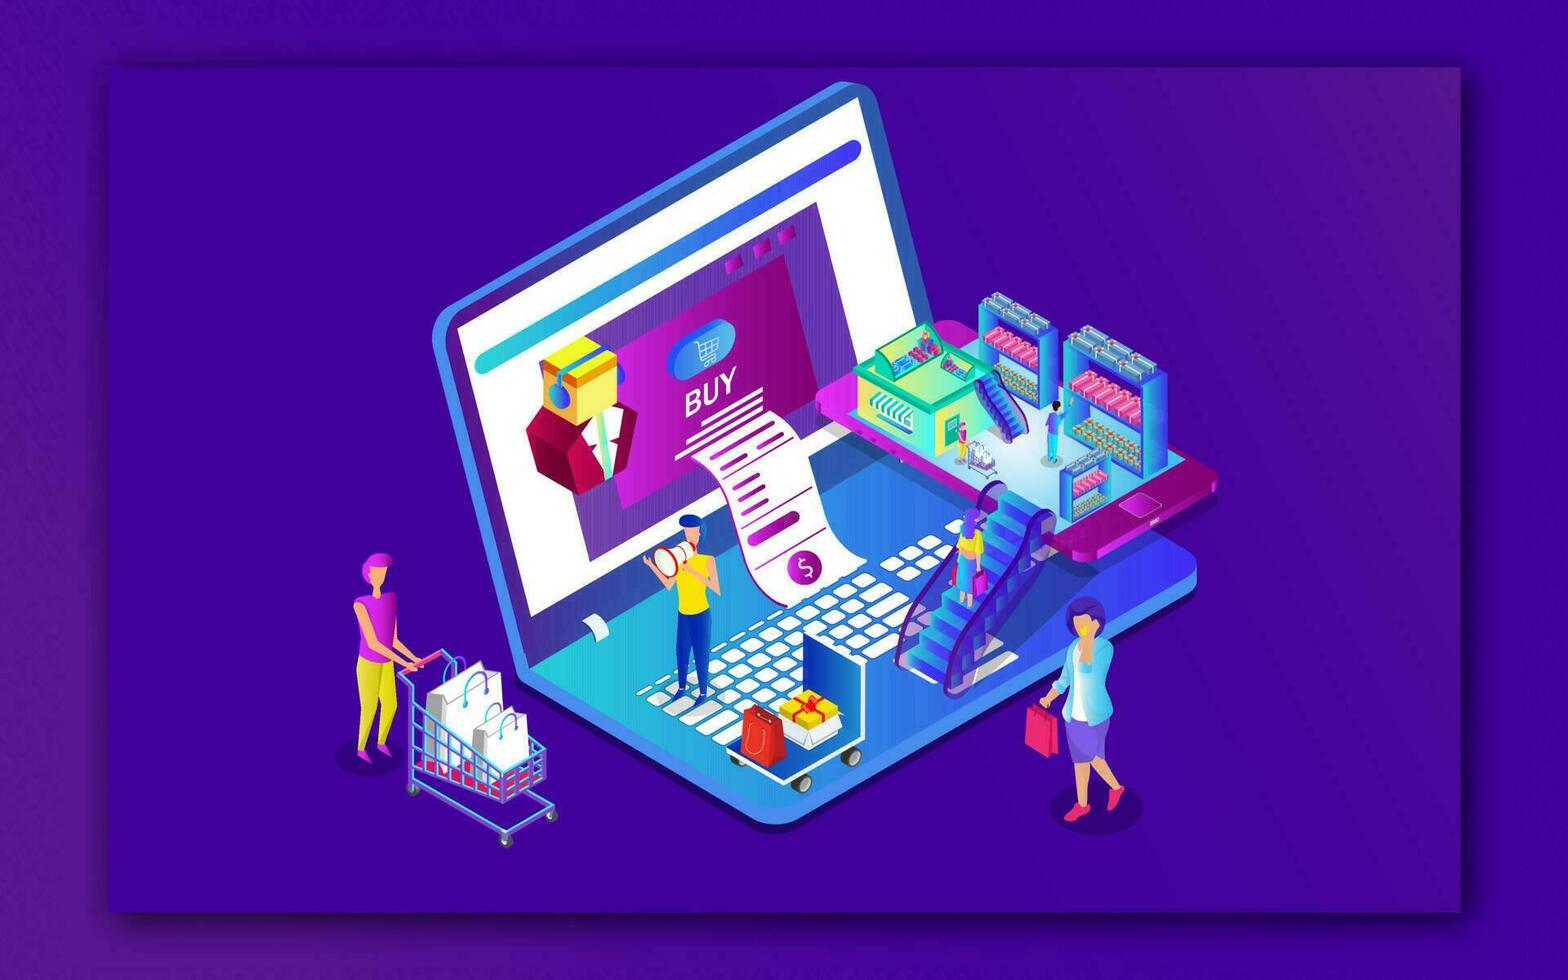 3D illustration of Online shopping or payment from laptop and smartphone with users character on purple background can be used as web poster design. vector